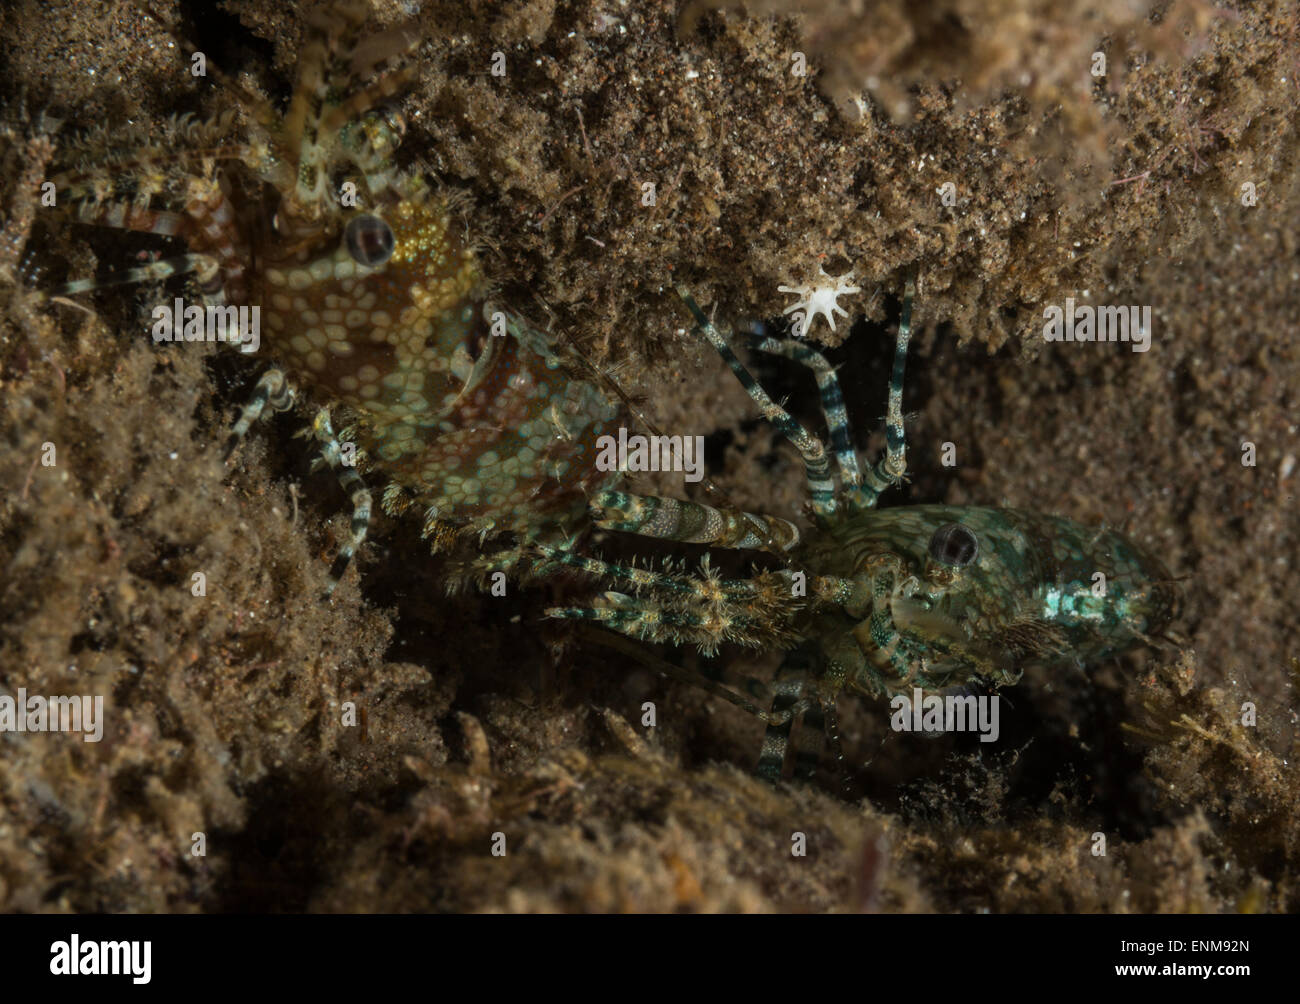 Common marble shrimp on a coral Stock Photo